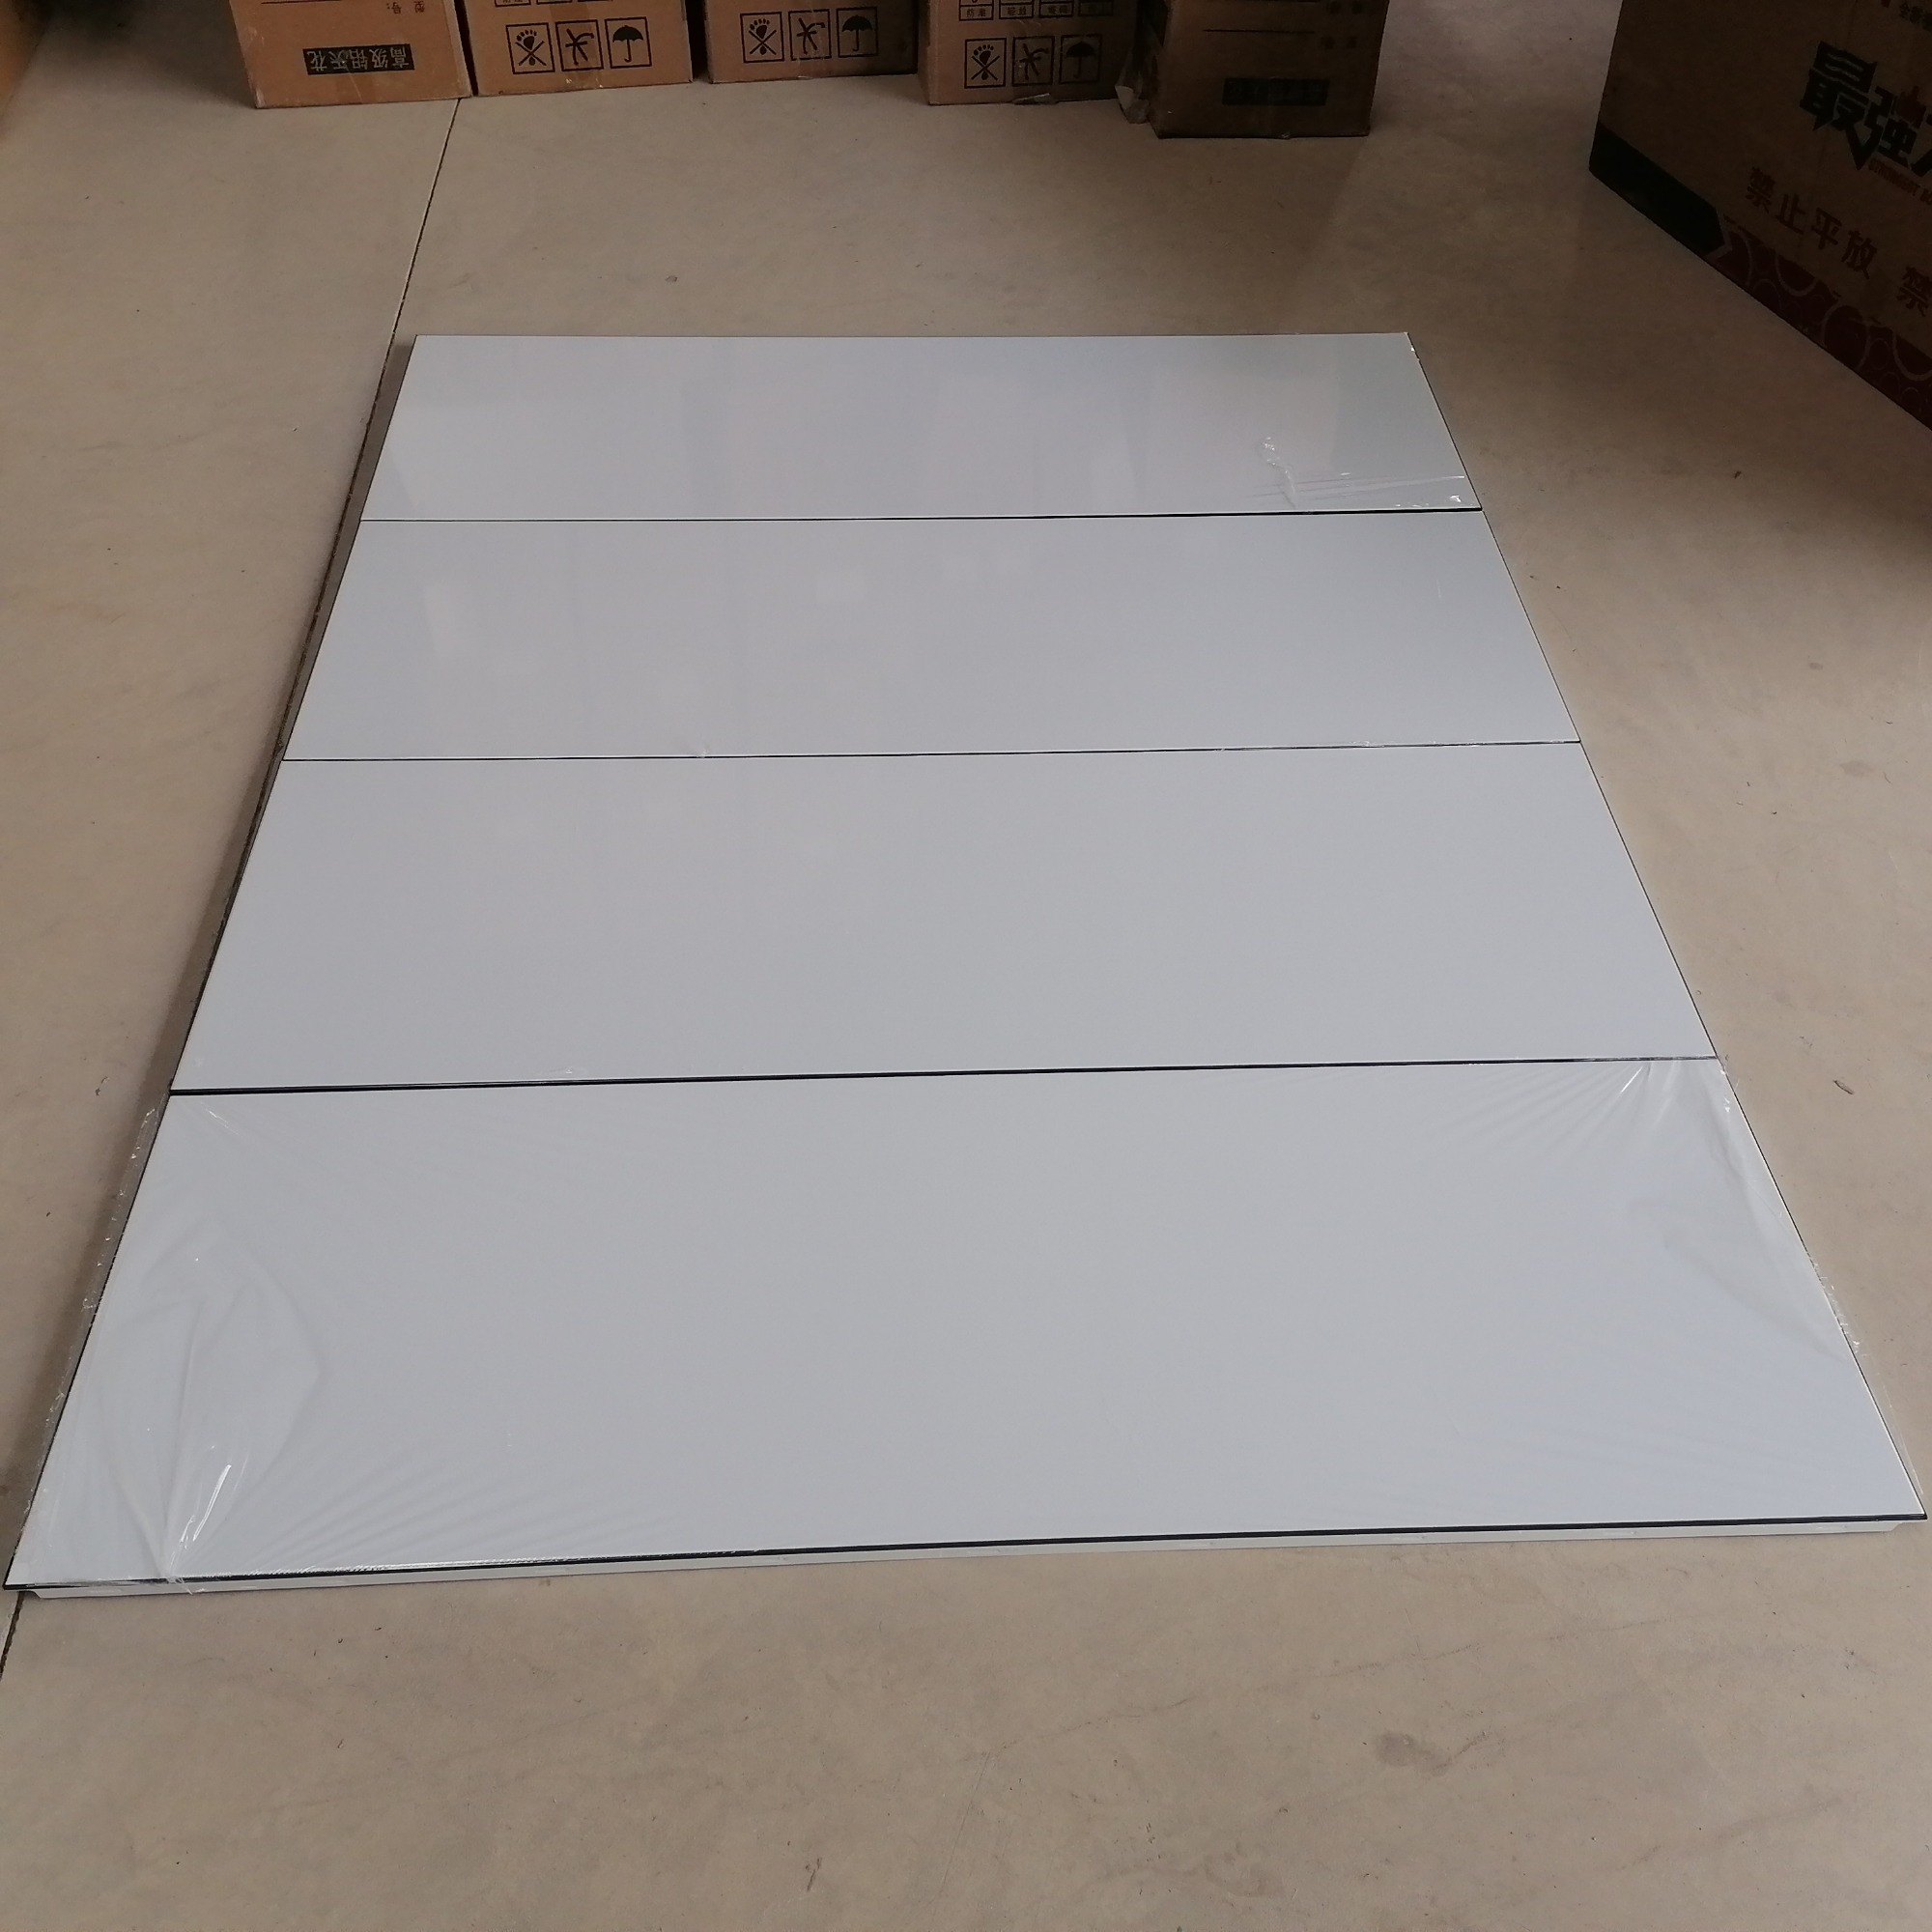 How the Clip-in aluminum ceiling tiles manufactured?